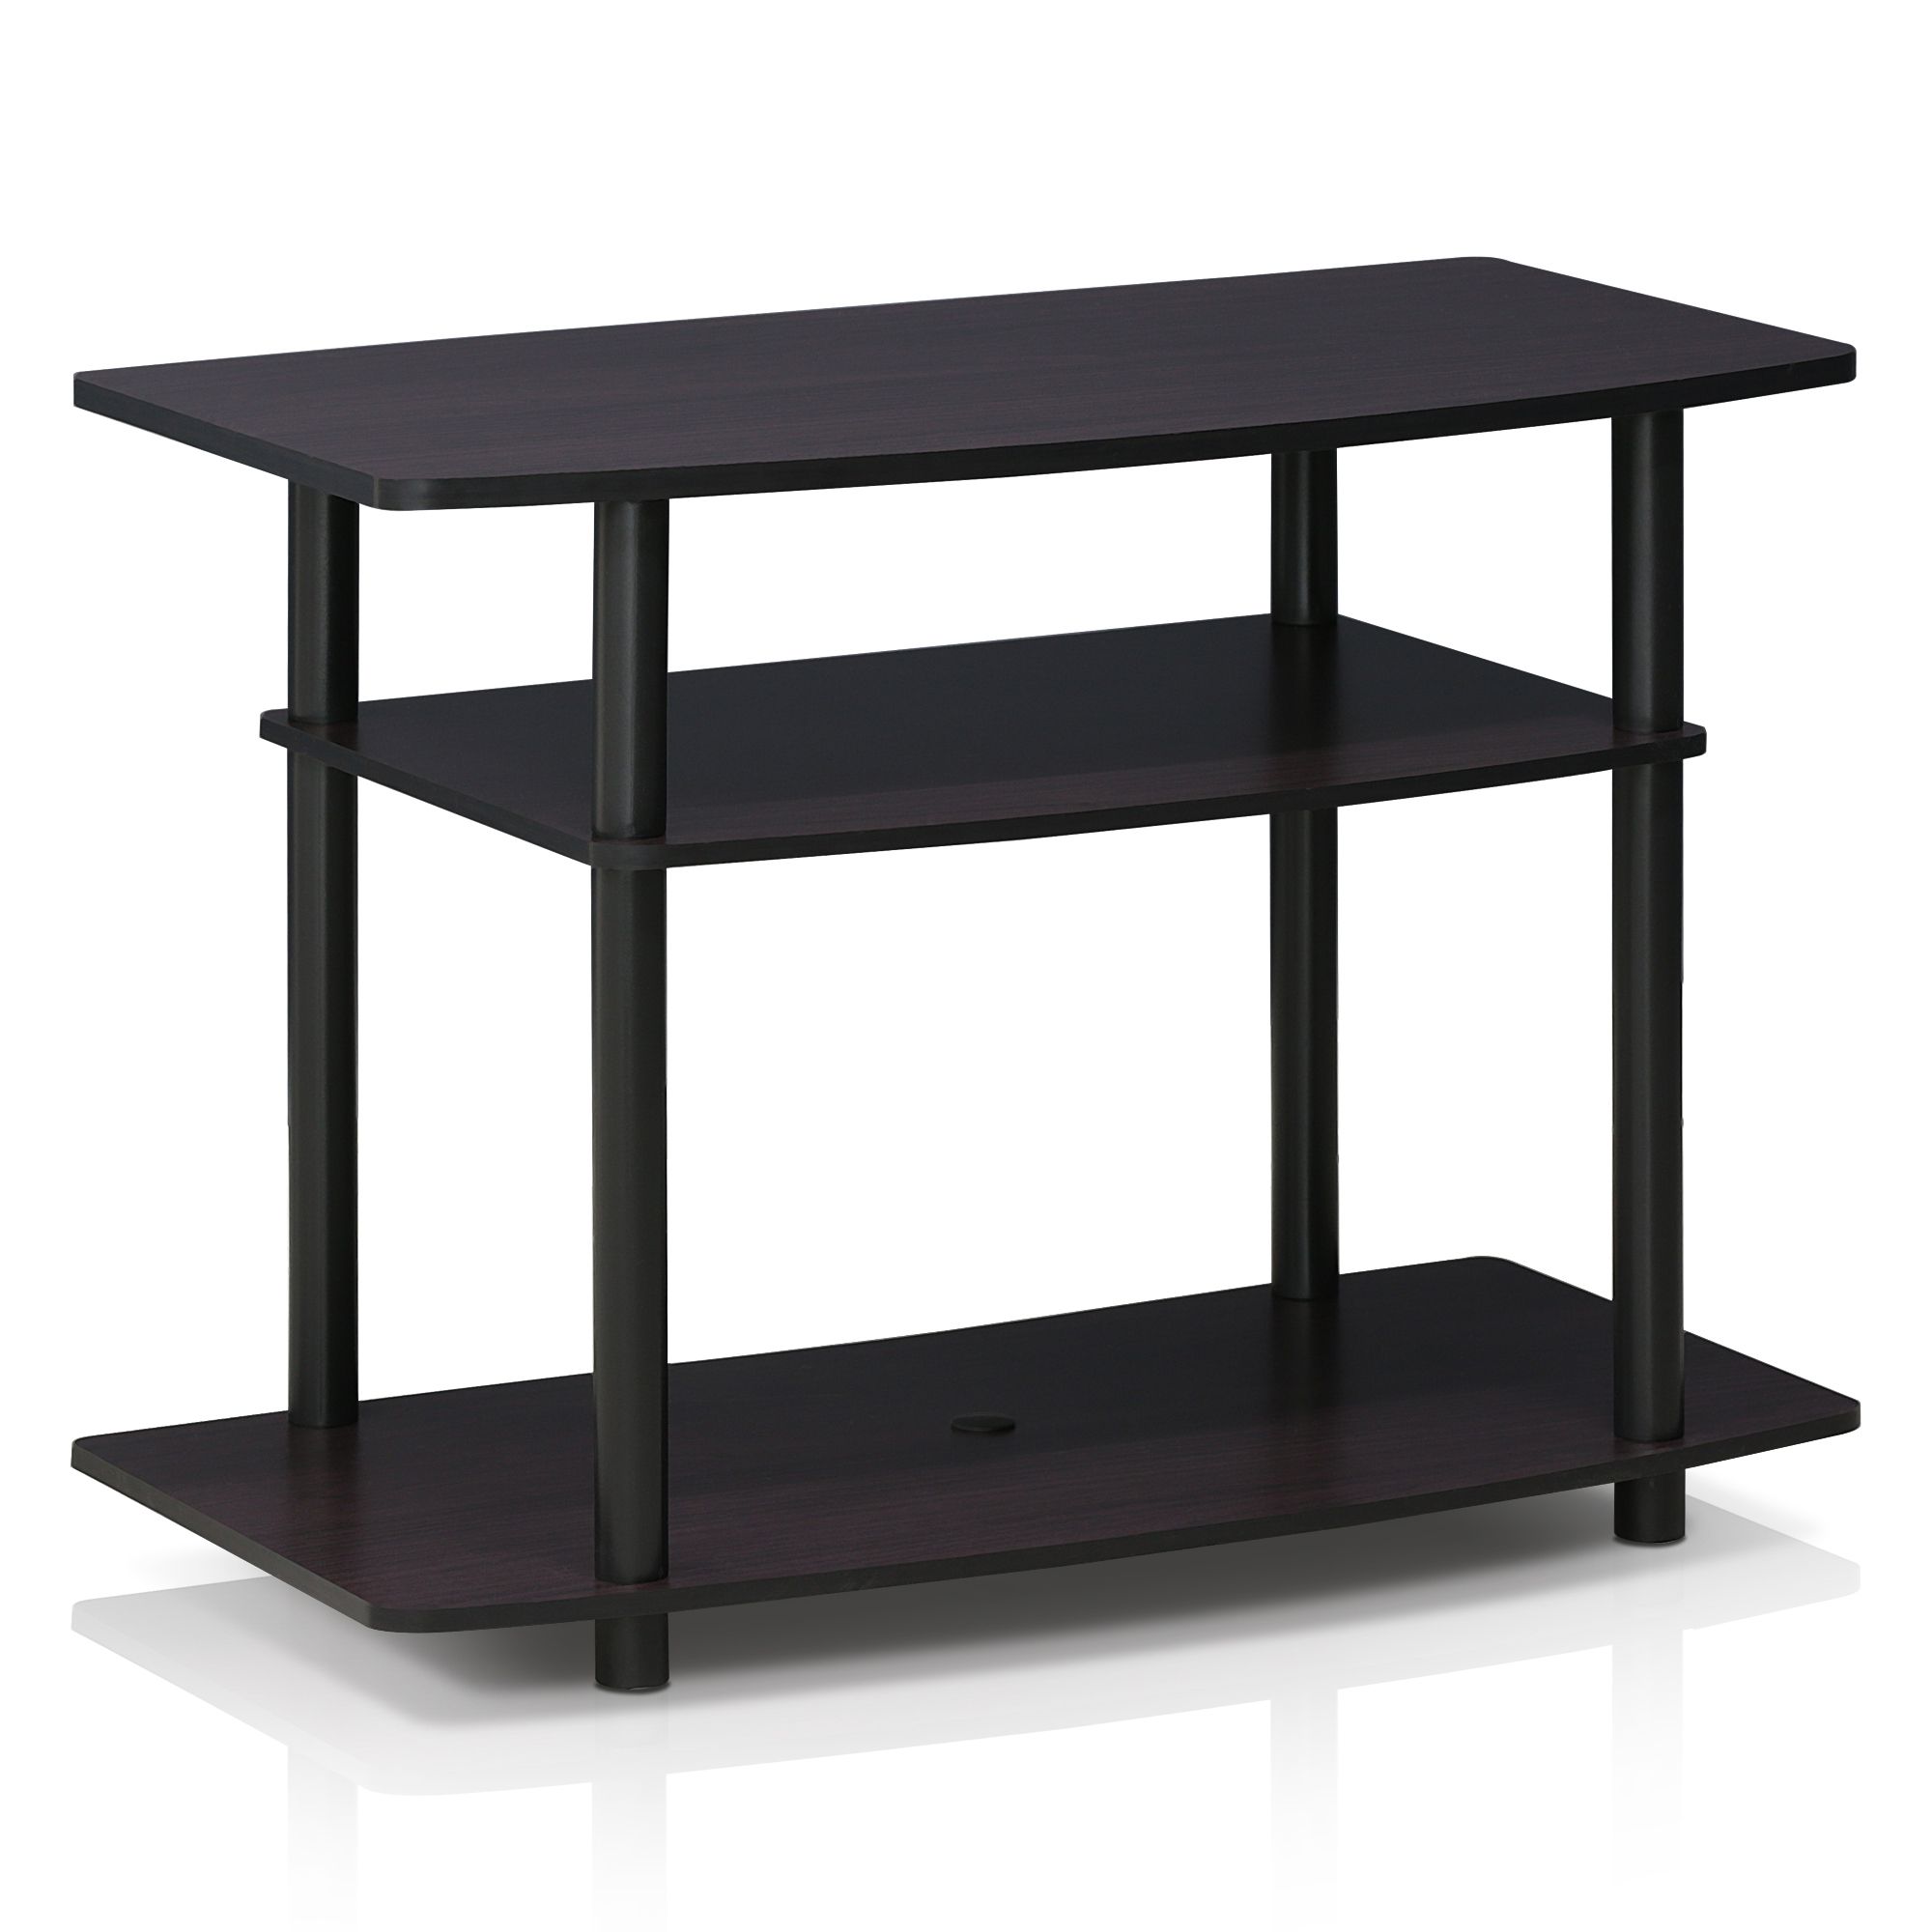 Furinno 13192dwn Turn N Tube No Tools 3 Tier Tv Stands Throughout Furinno 2 Tier Elevated Tv Stands (View 14 of 15)